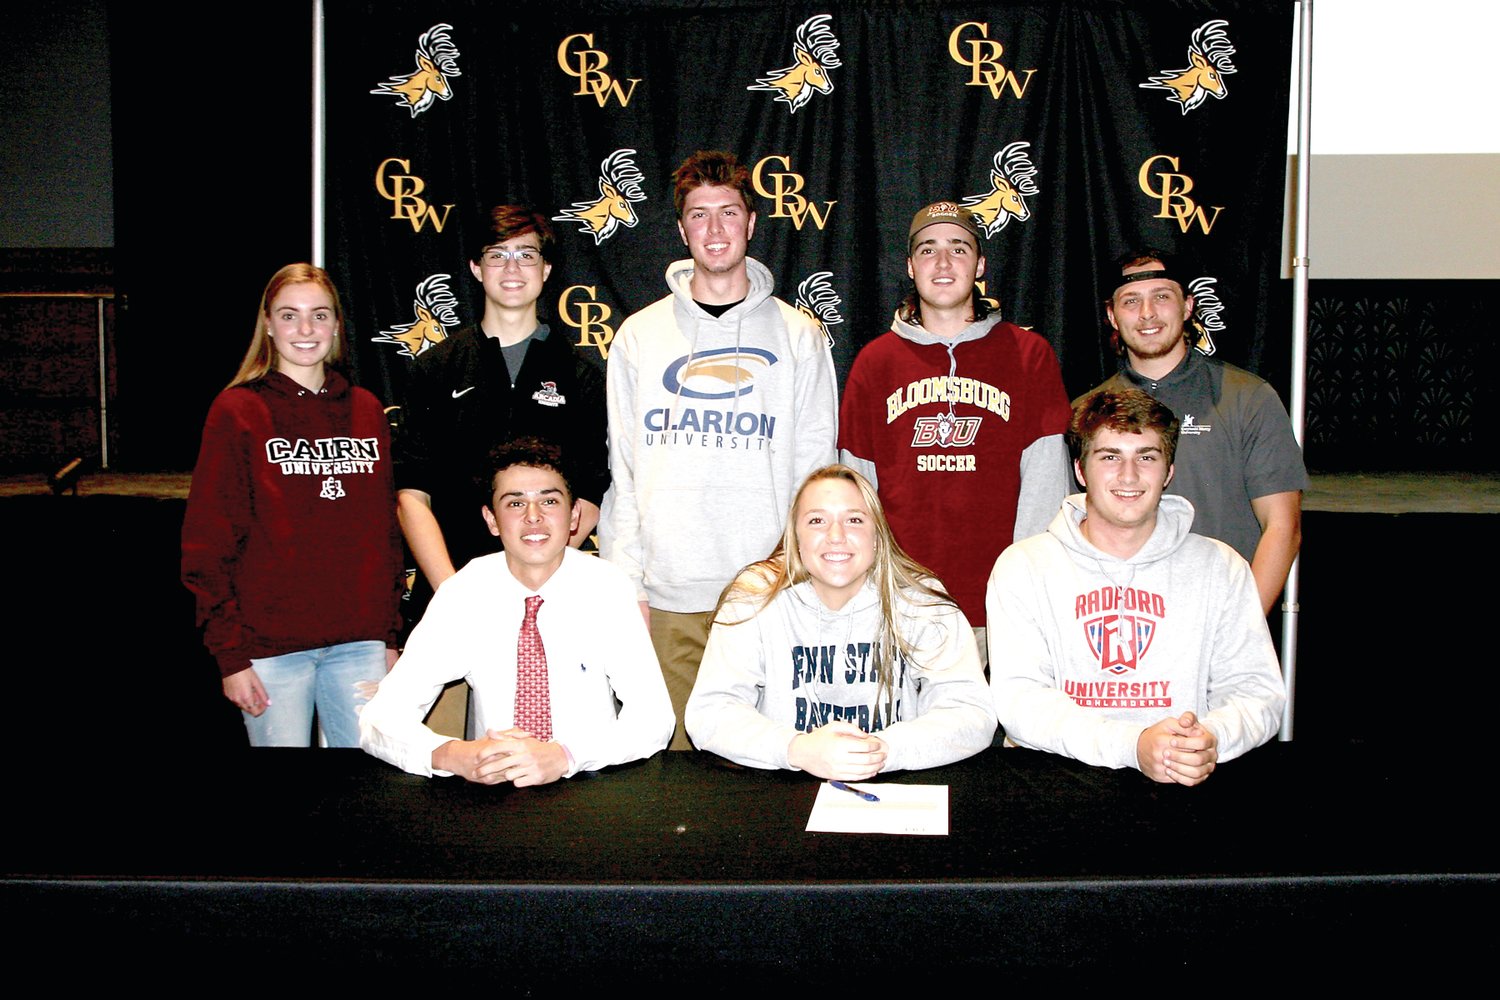 At CB West’s college signing ceremony are, from left, front row, Nick Hano, Maddie Burke, Gene McGough; back row, Grace Miller, Thomas Kelly, Danny Miller, Bailey Moyer and Max Dunar. Photograph by Mary Jane Souder.